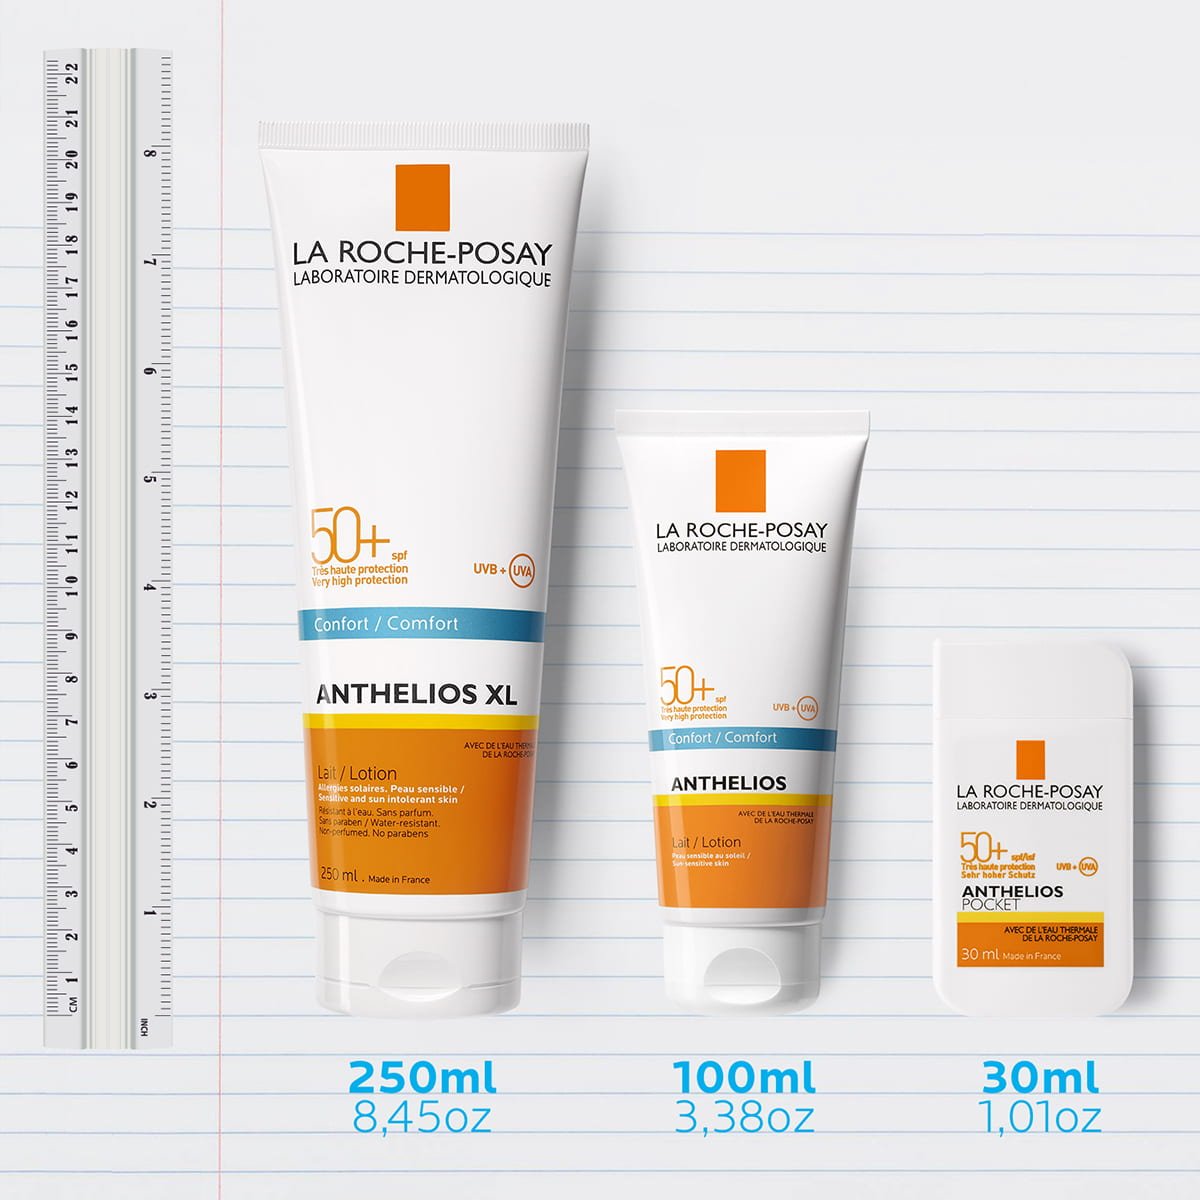 La Roche Posay ProductPage Sun Anthelios SPF50 Family 3337875550611 33